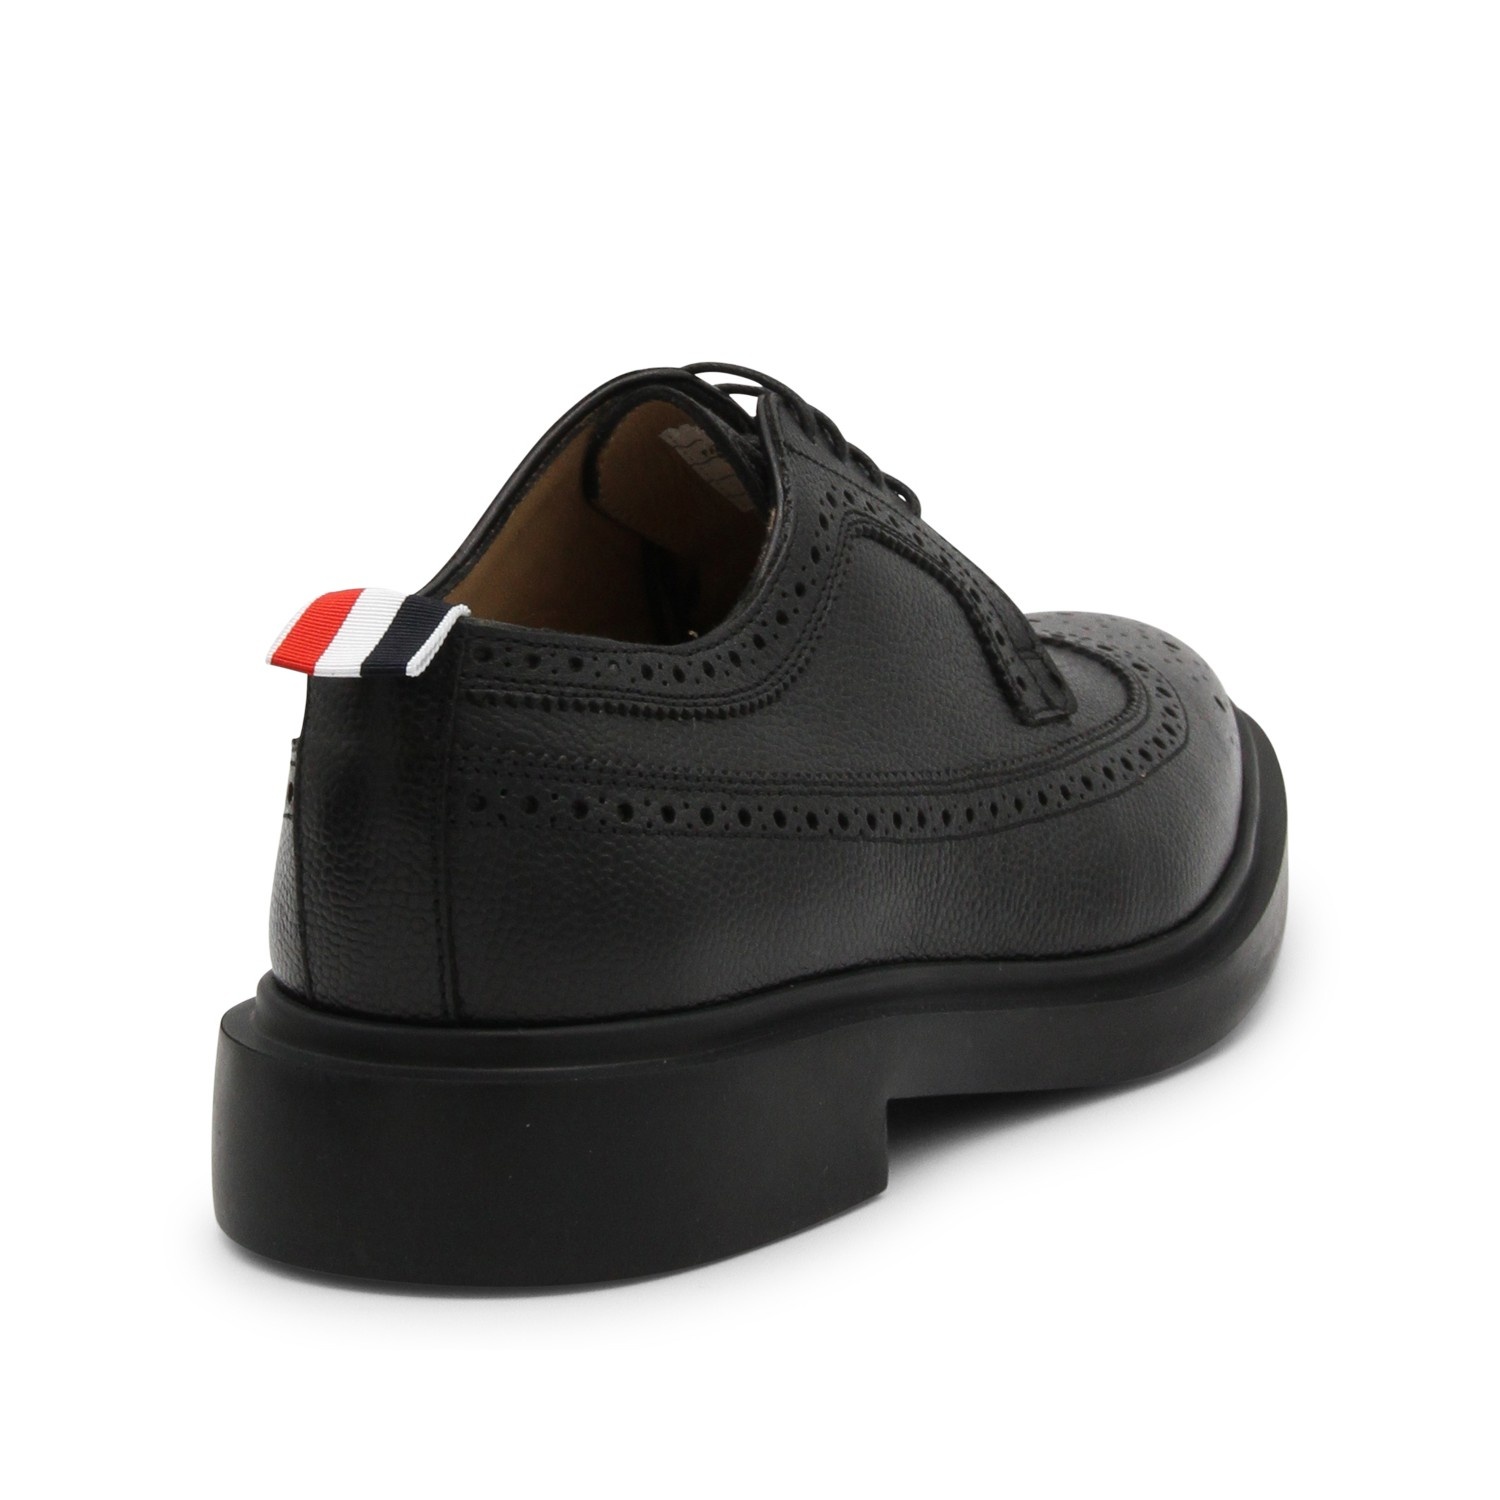 BLACK LEATHER LONGWING BROGUES - 3